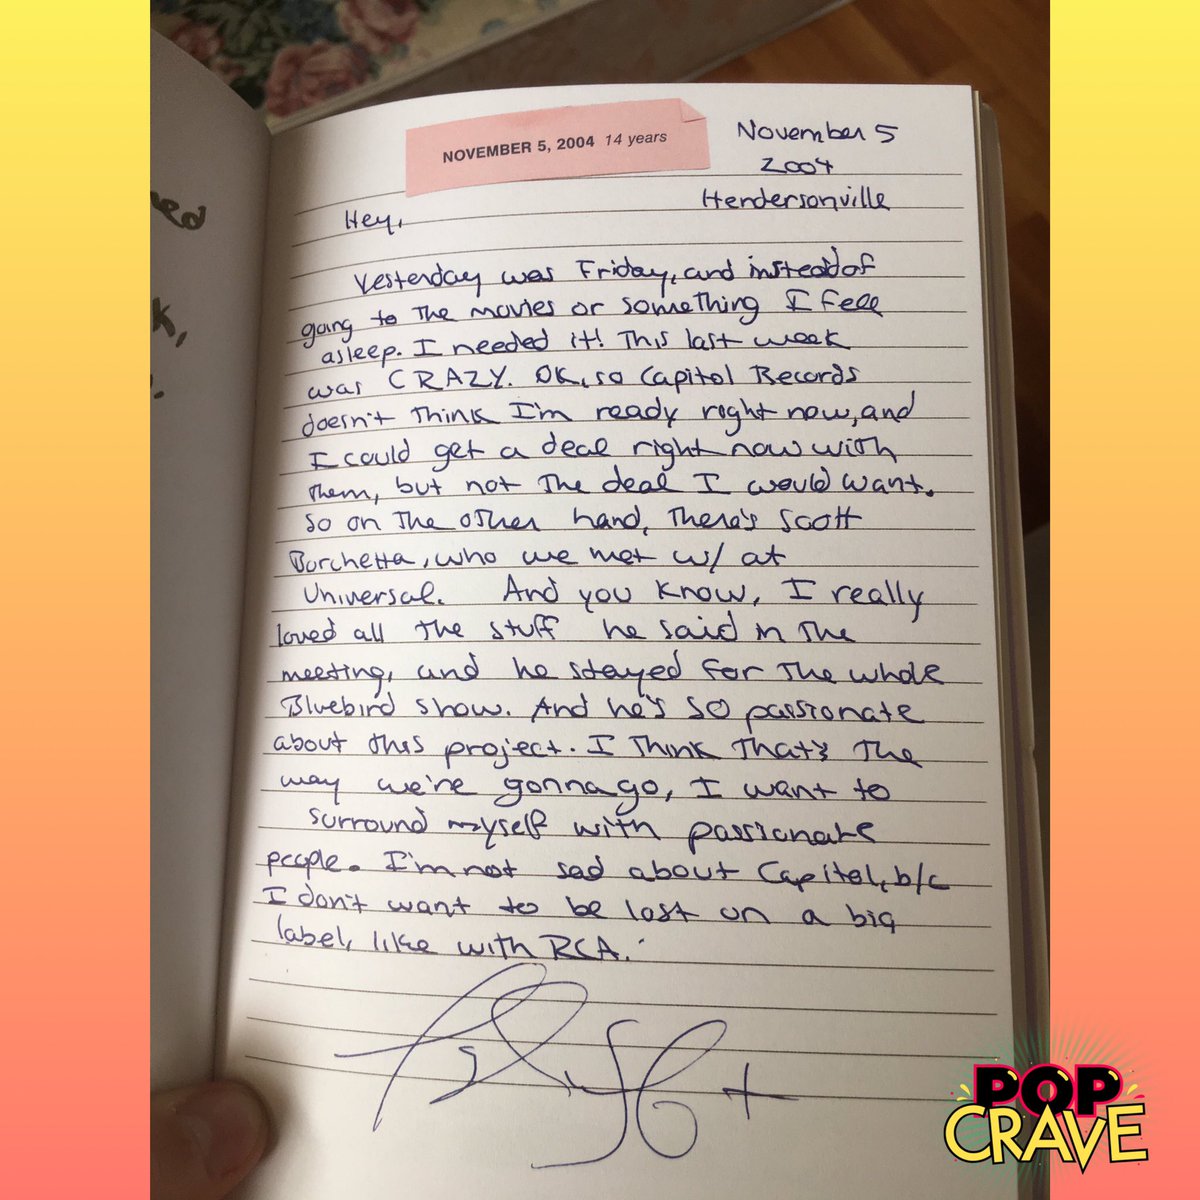 Pop Crave On Twitter A Taylor Swift Diary Entry From